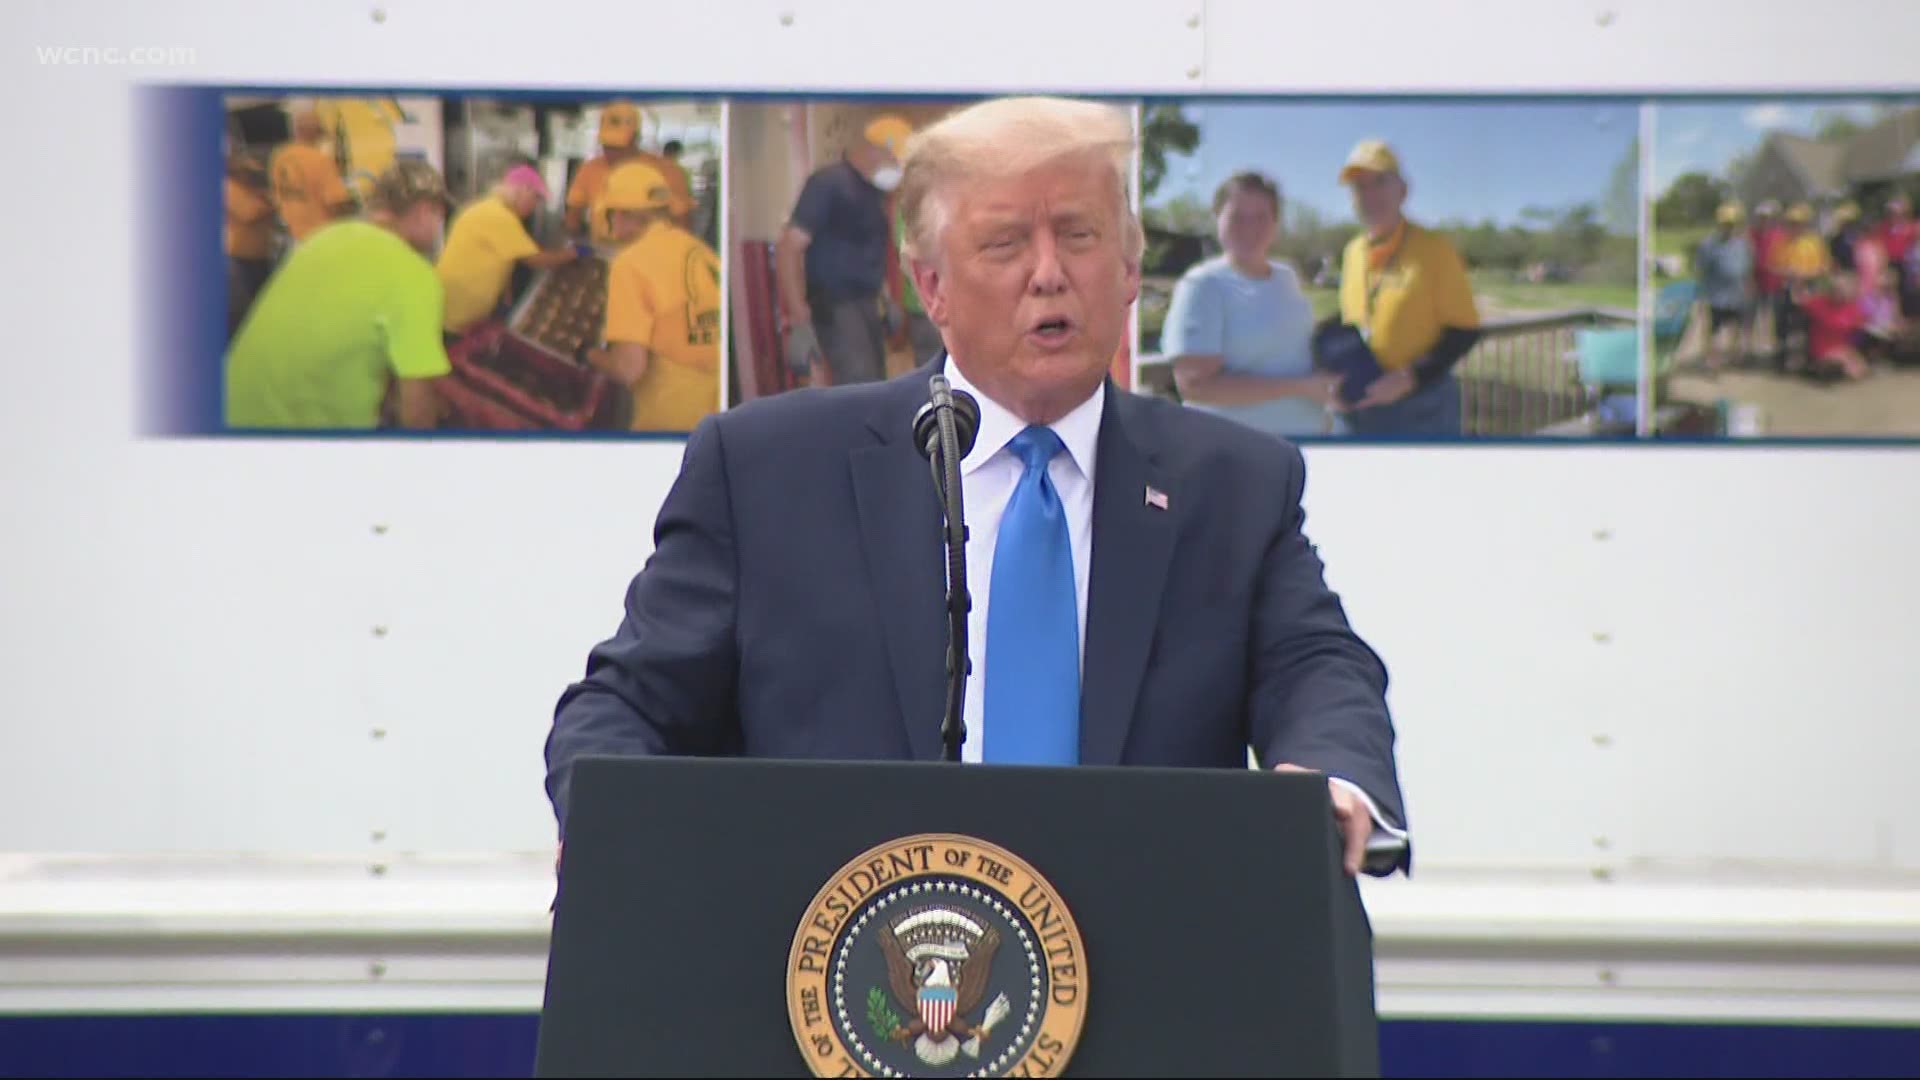 President Trump is speaking in Mills River, North Carolina at an event with the Farmers to Families Food Box program.